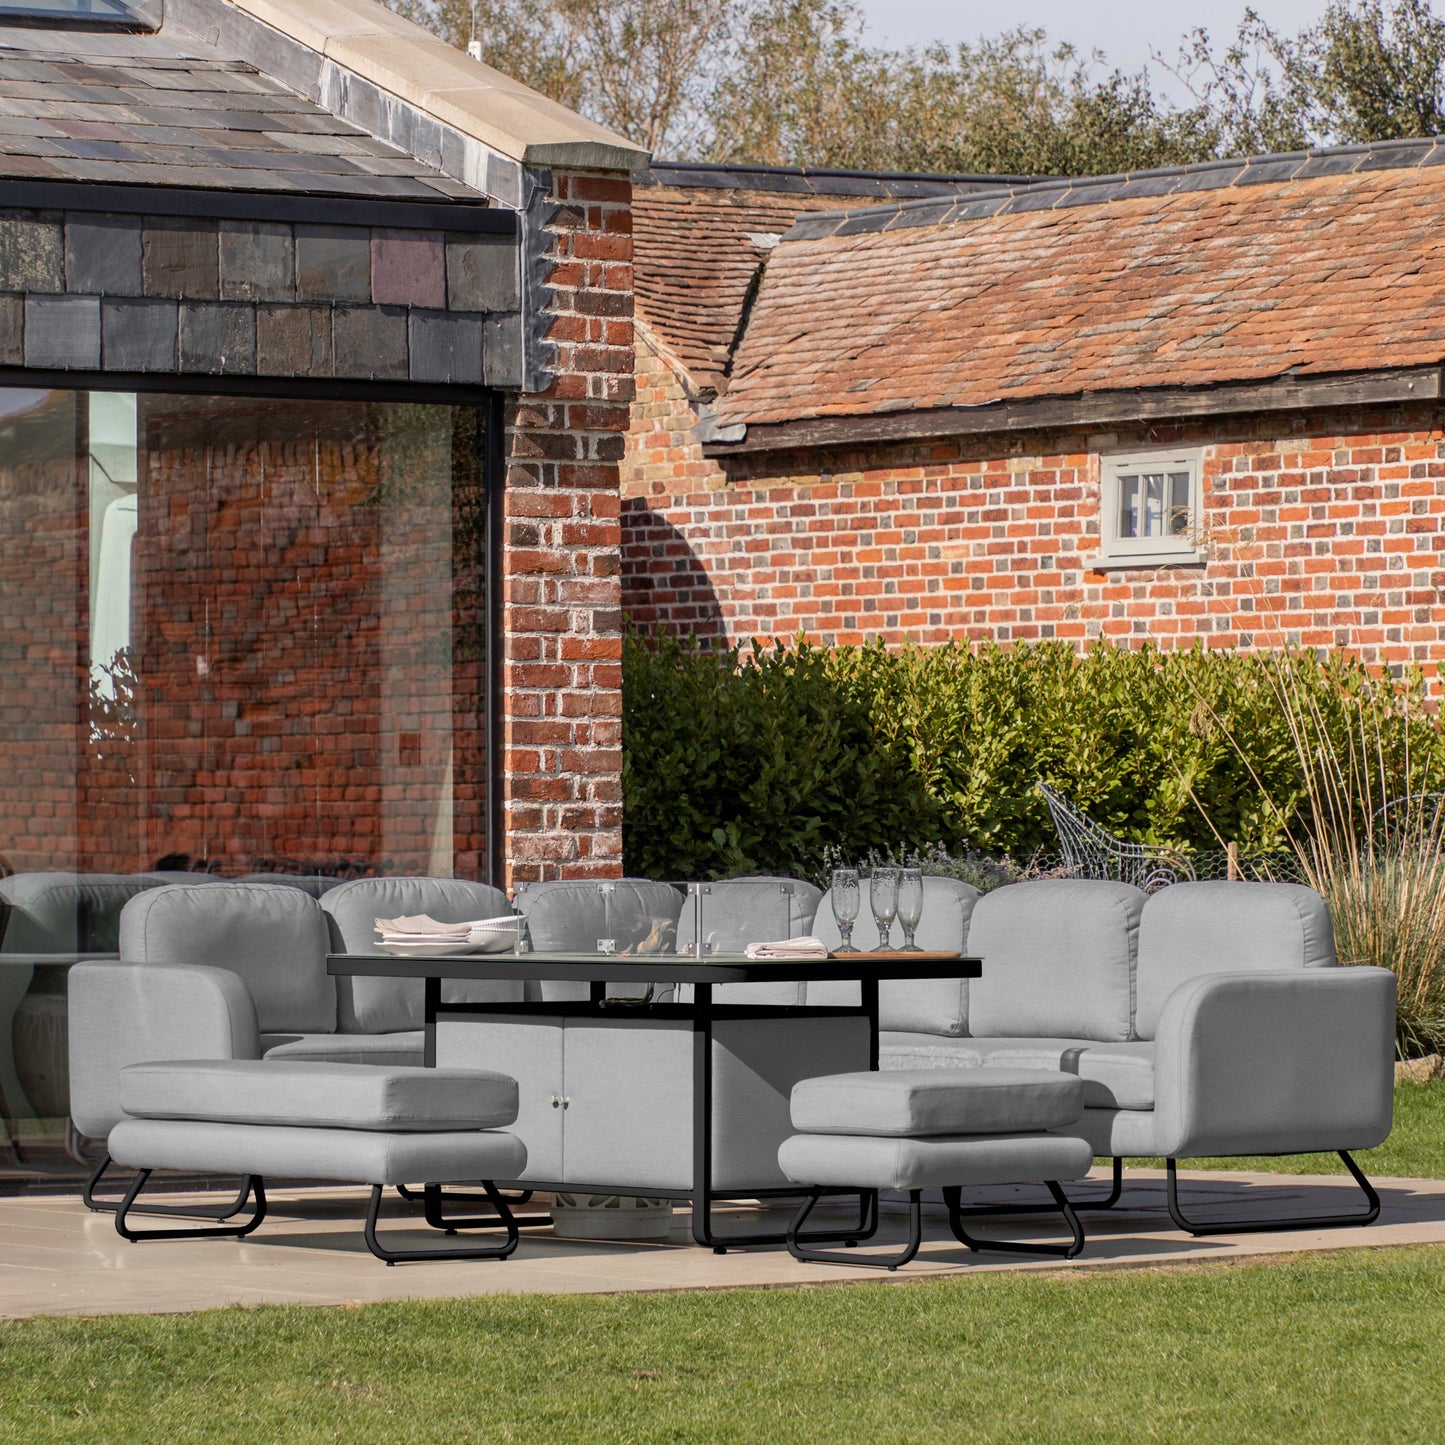 A patio with a Topsham Rect Dining Set with Fire Pit Table Slate from Kikiathome.co.uk, ideal for home furniture and interior decor, situated in front of a brick house.